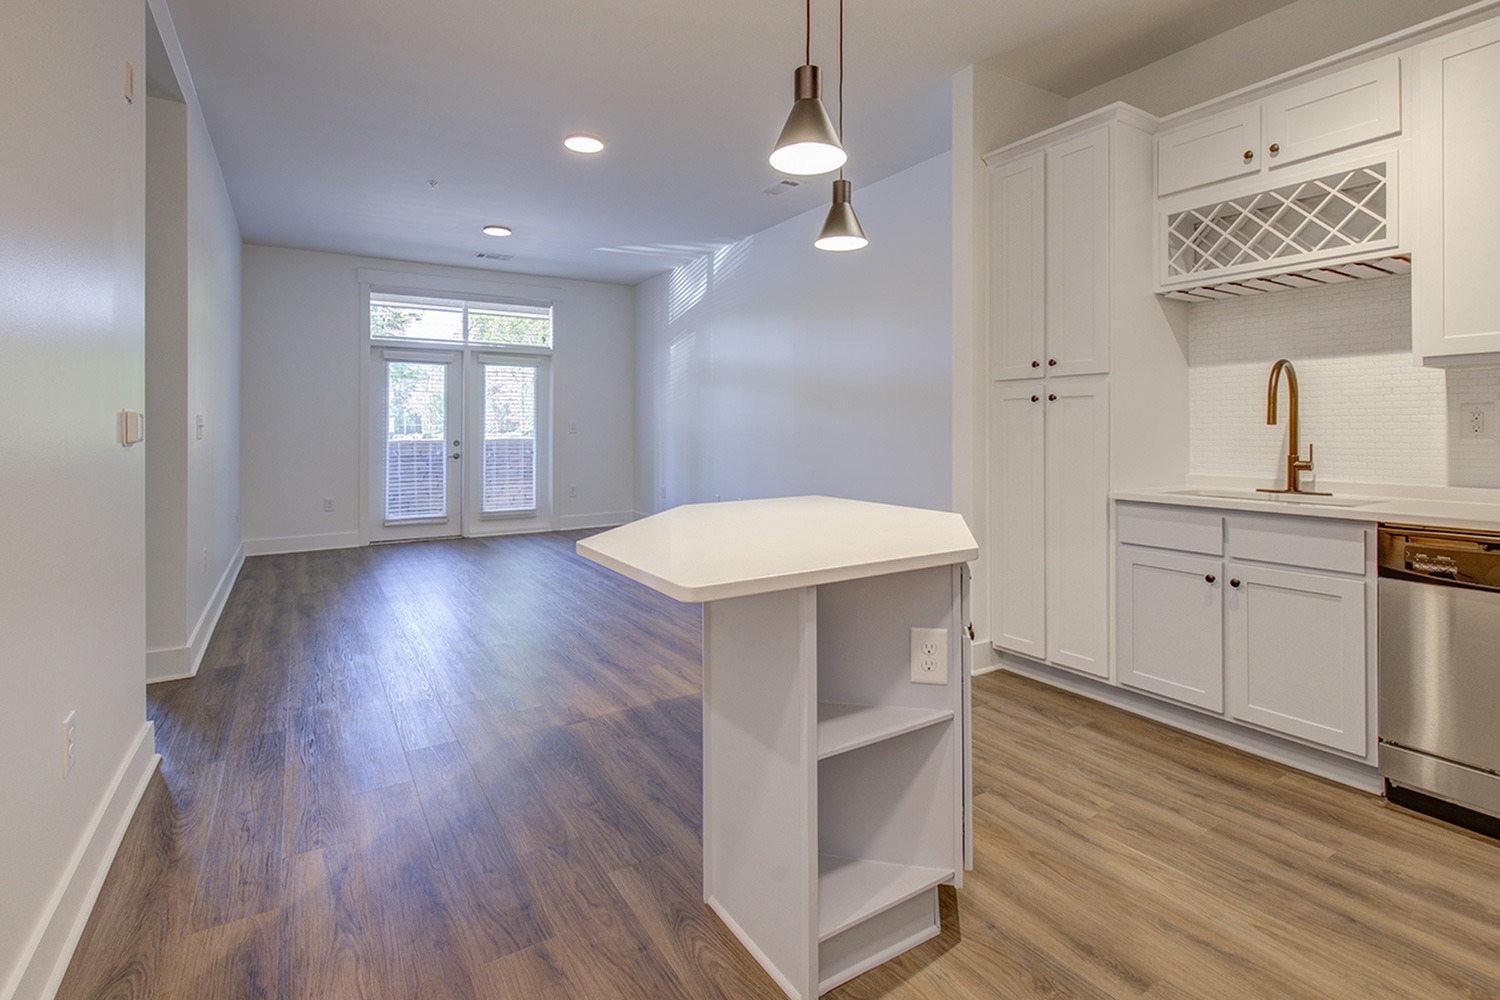 Open Living Space | Apartments in Cary, NC | Lofts at Weston